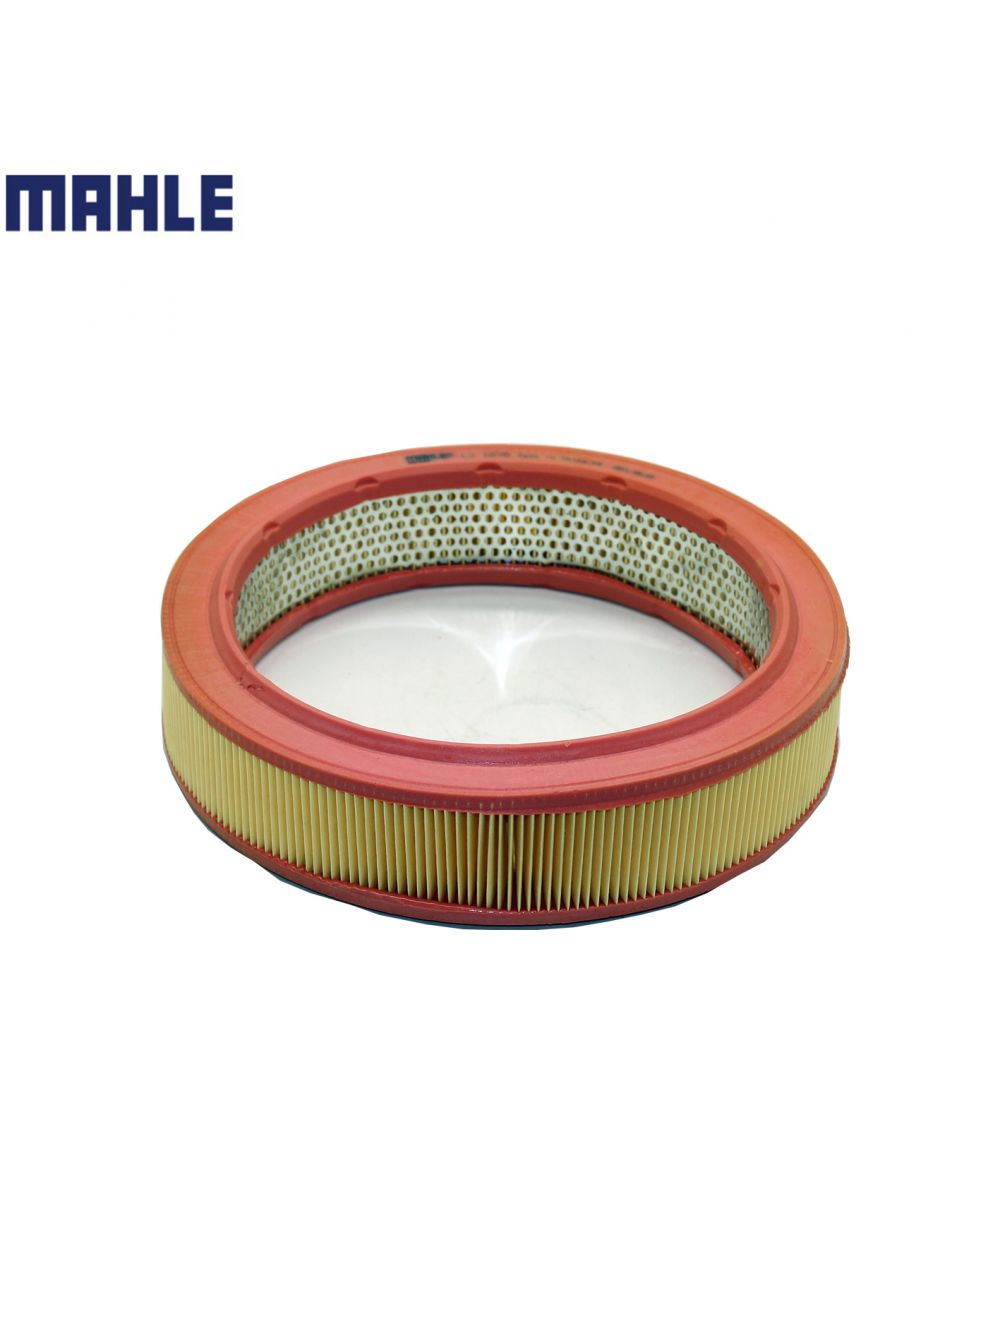 New In stock for sale, MAHLE Filter LX1678